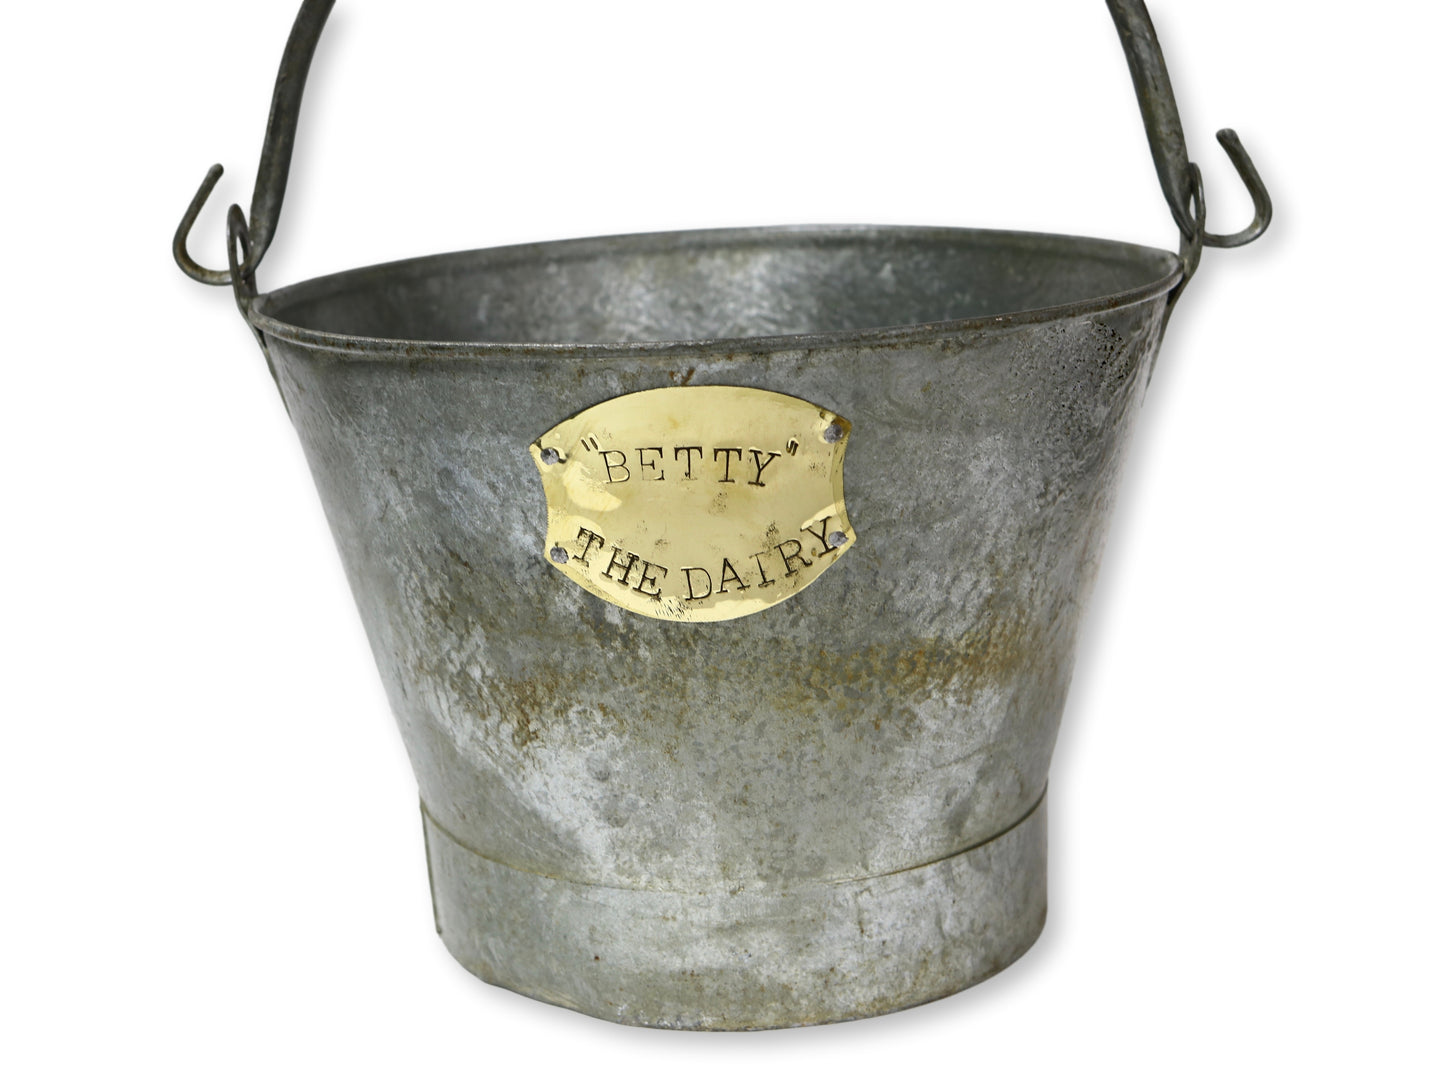 English Dairy Bucket For "Betty" The Cow